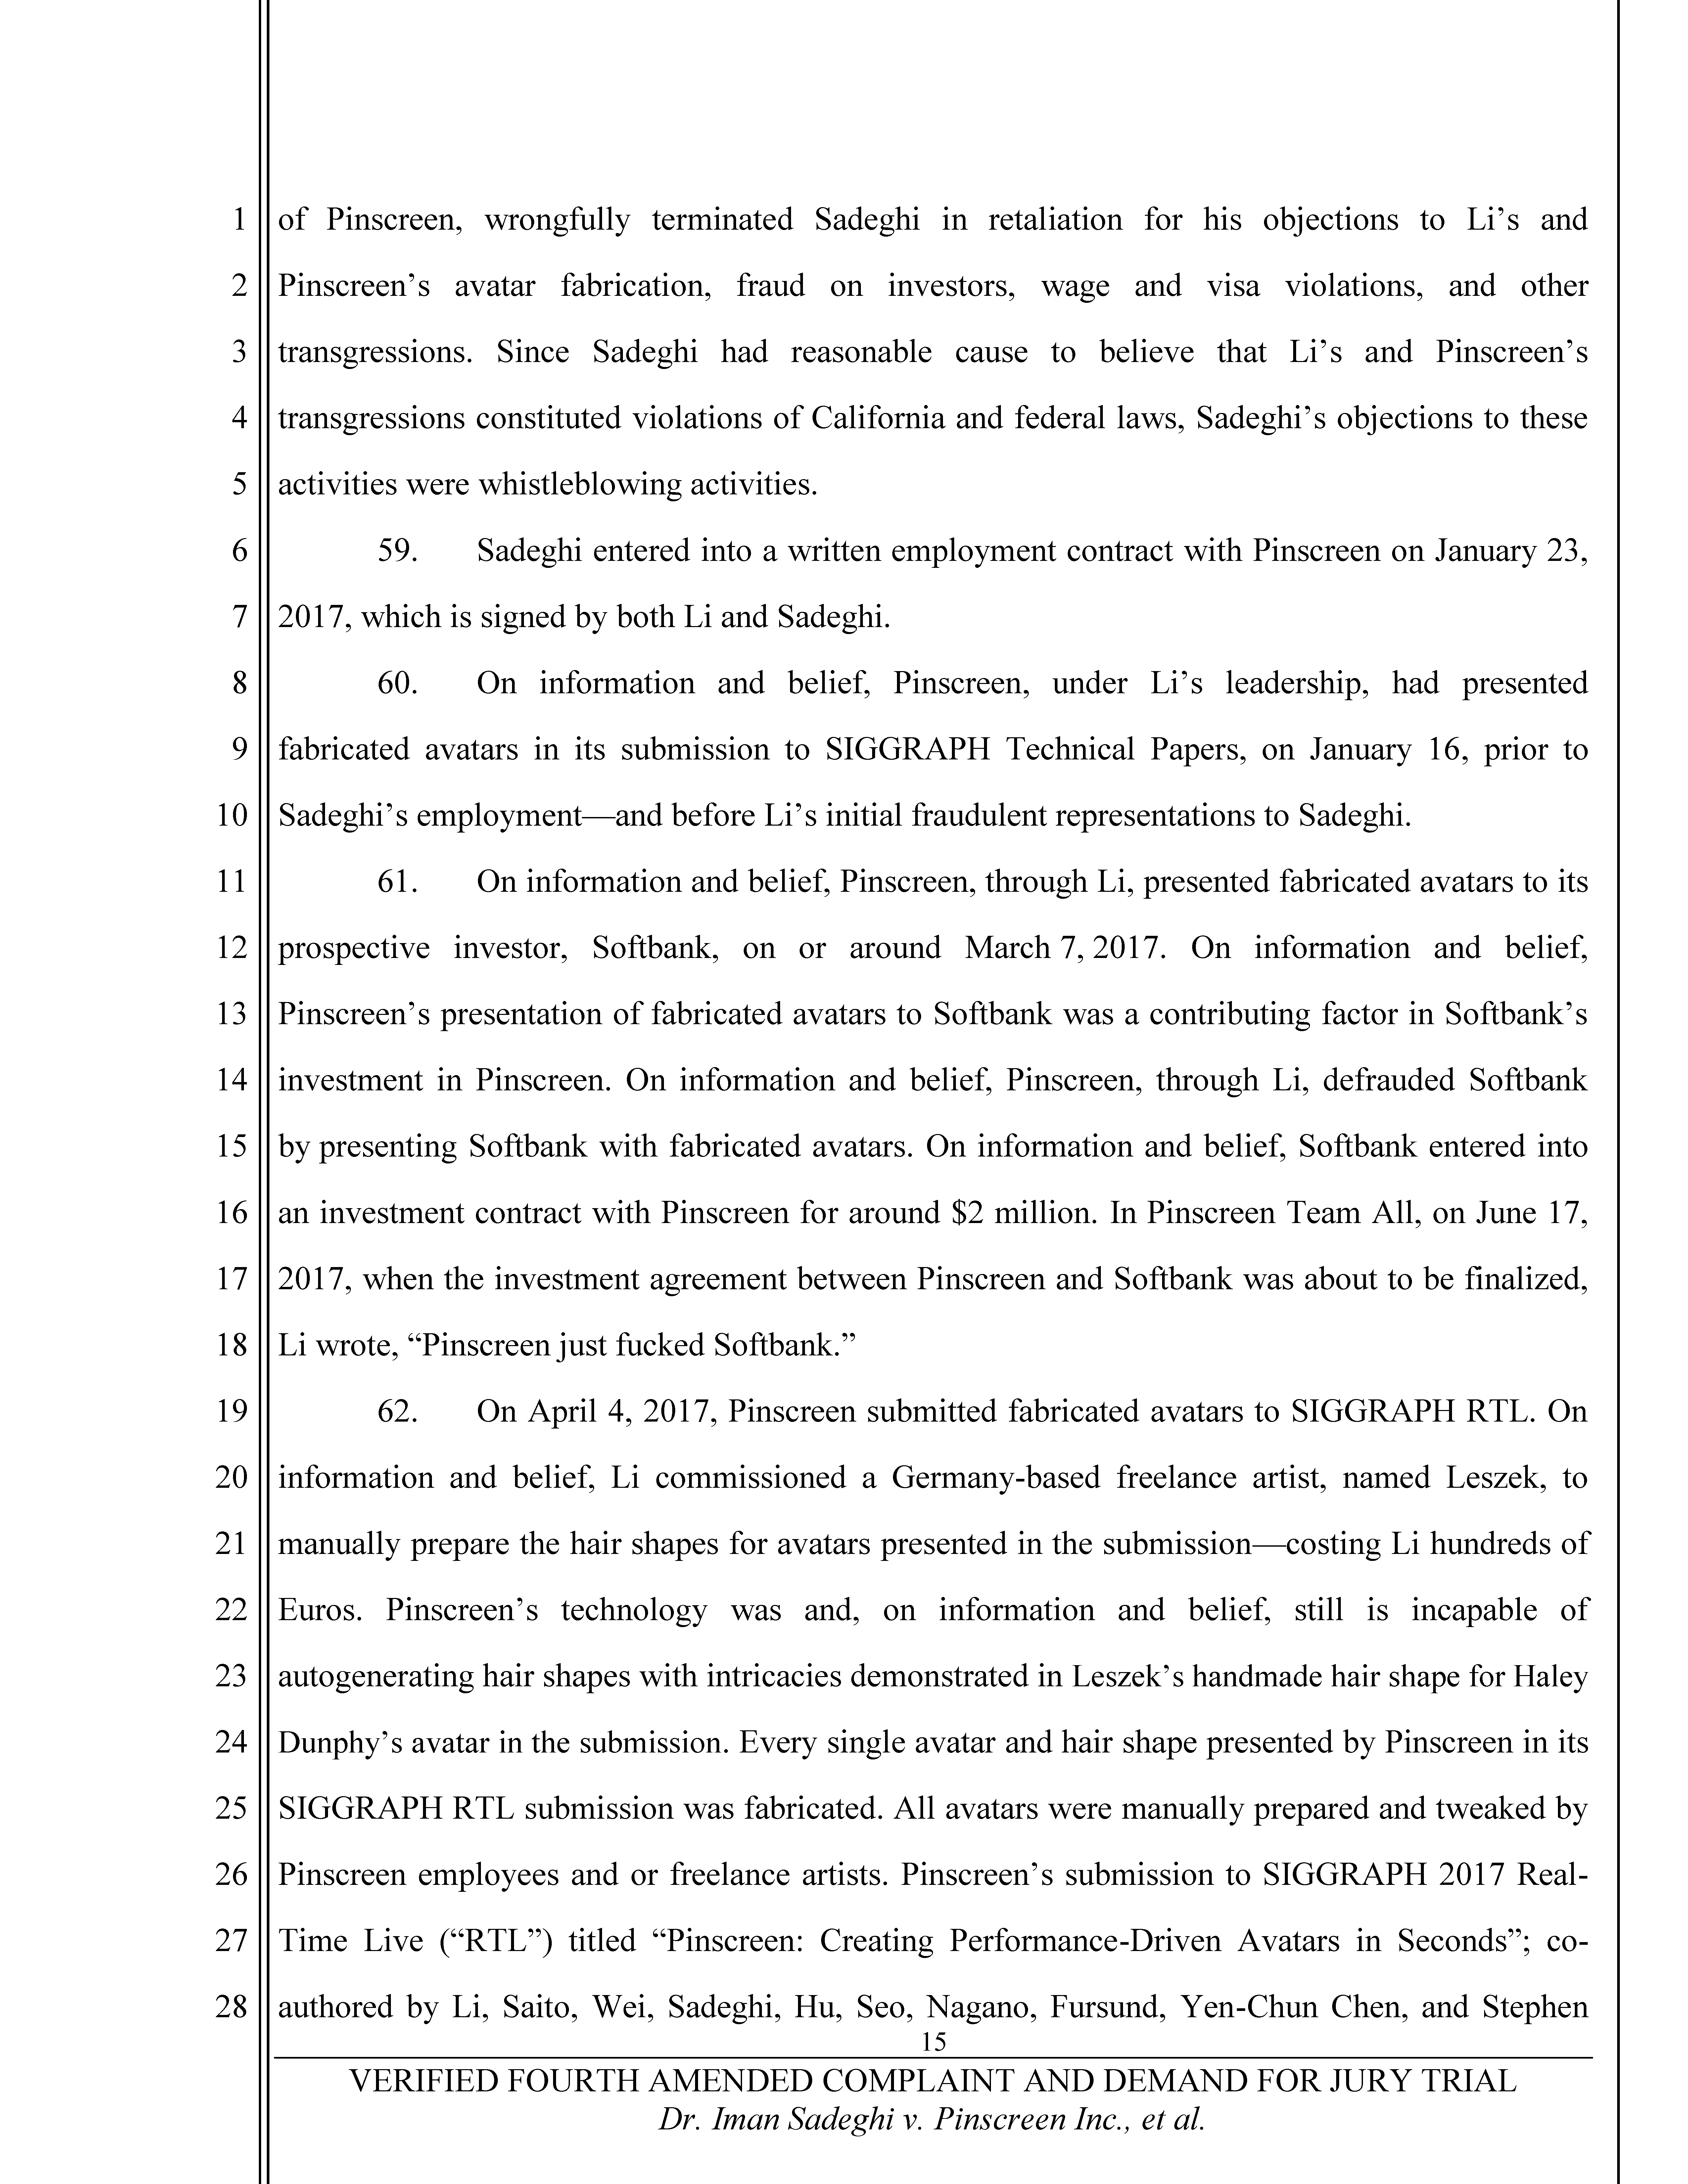 Fourth Amended Complaint (4AC) Page 16